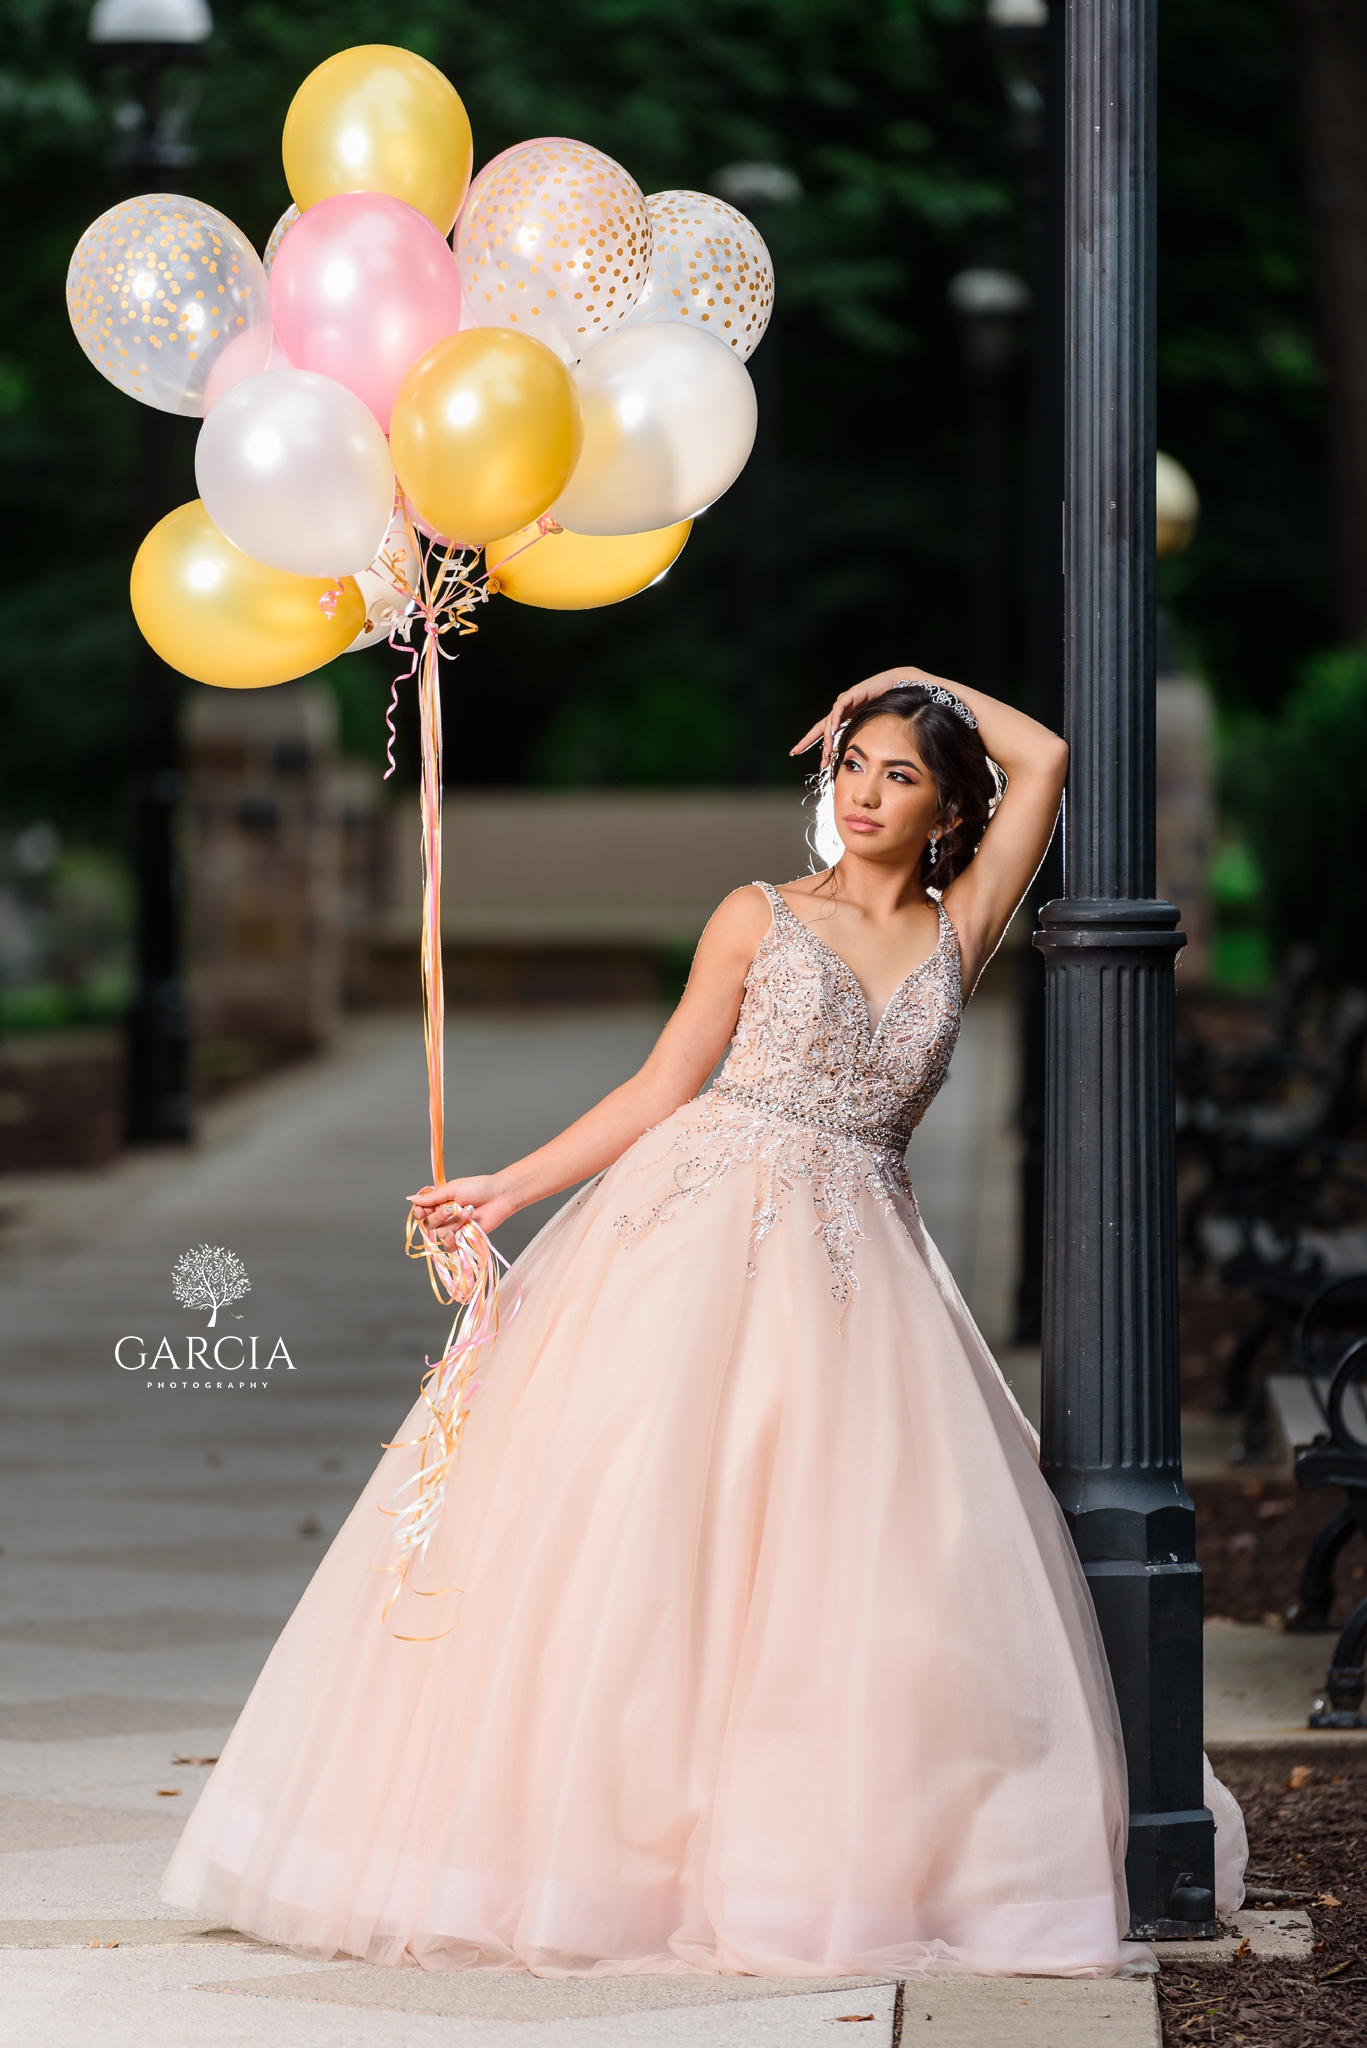 Nicole-Quince-Session-Garcia-Photography-4817.jpg